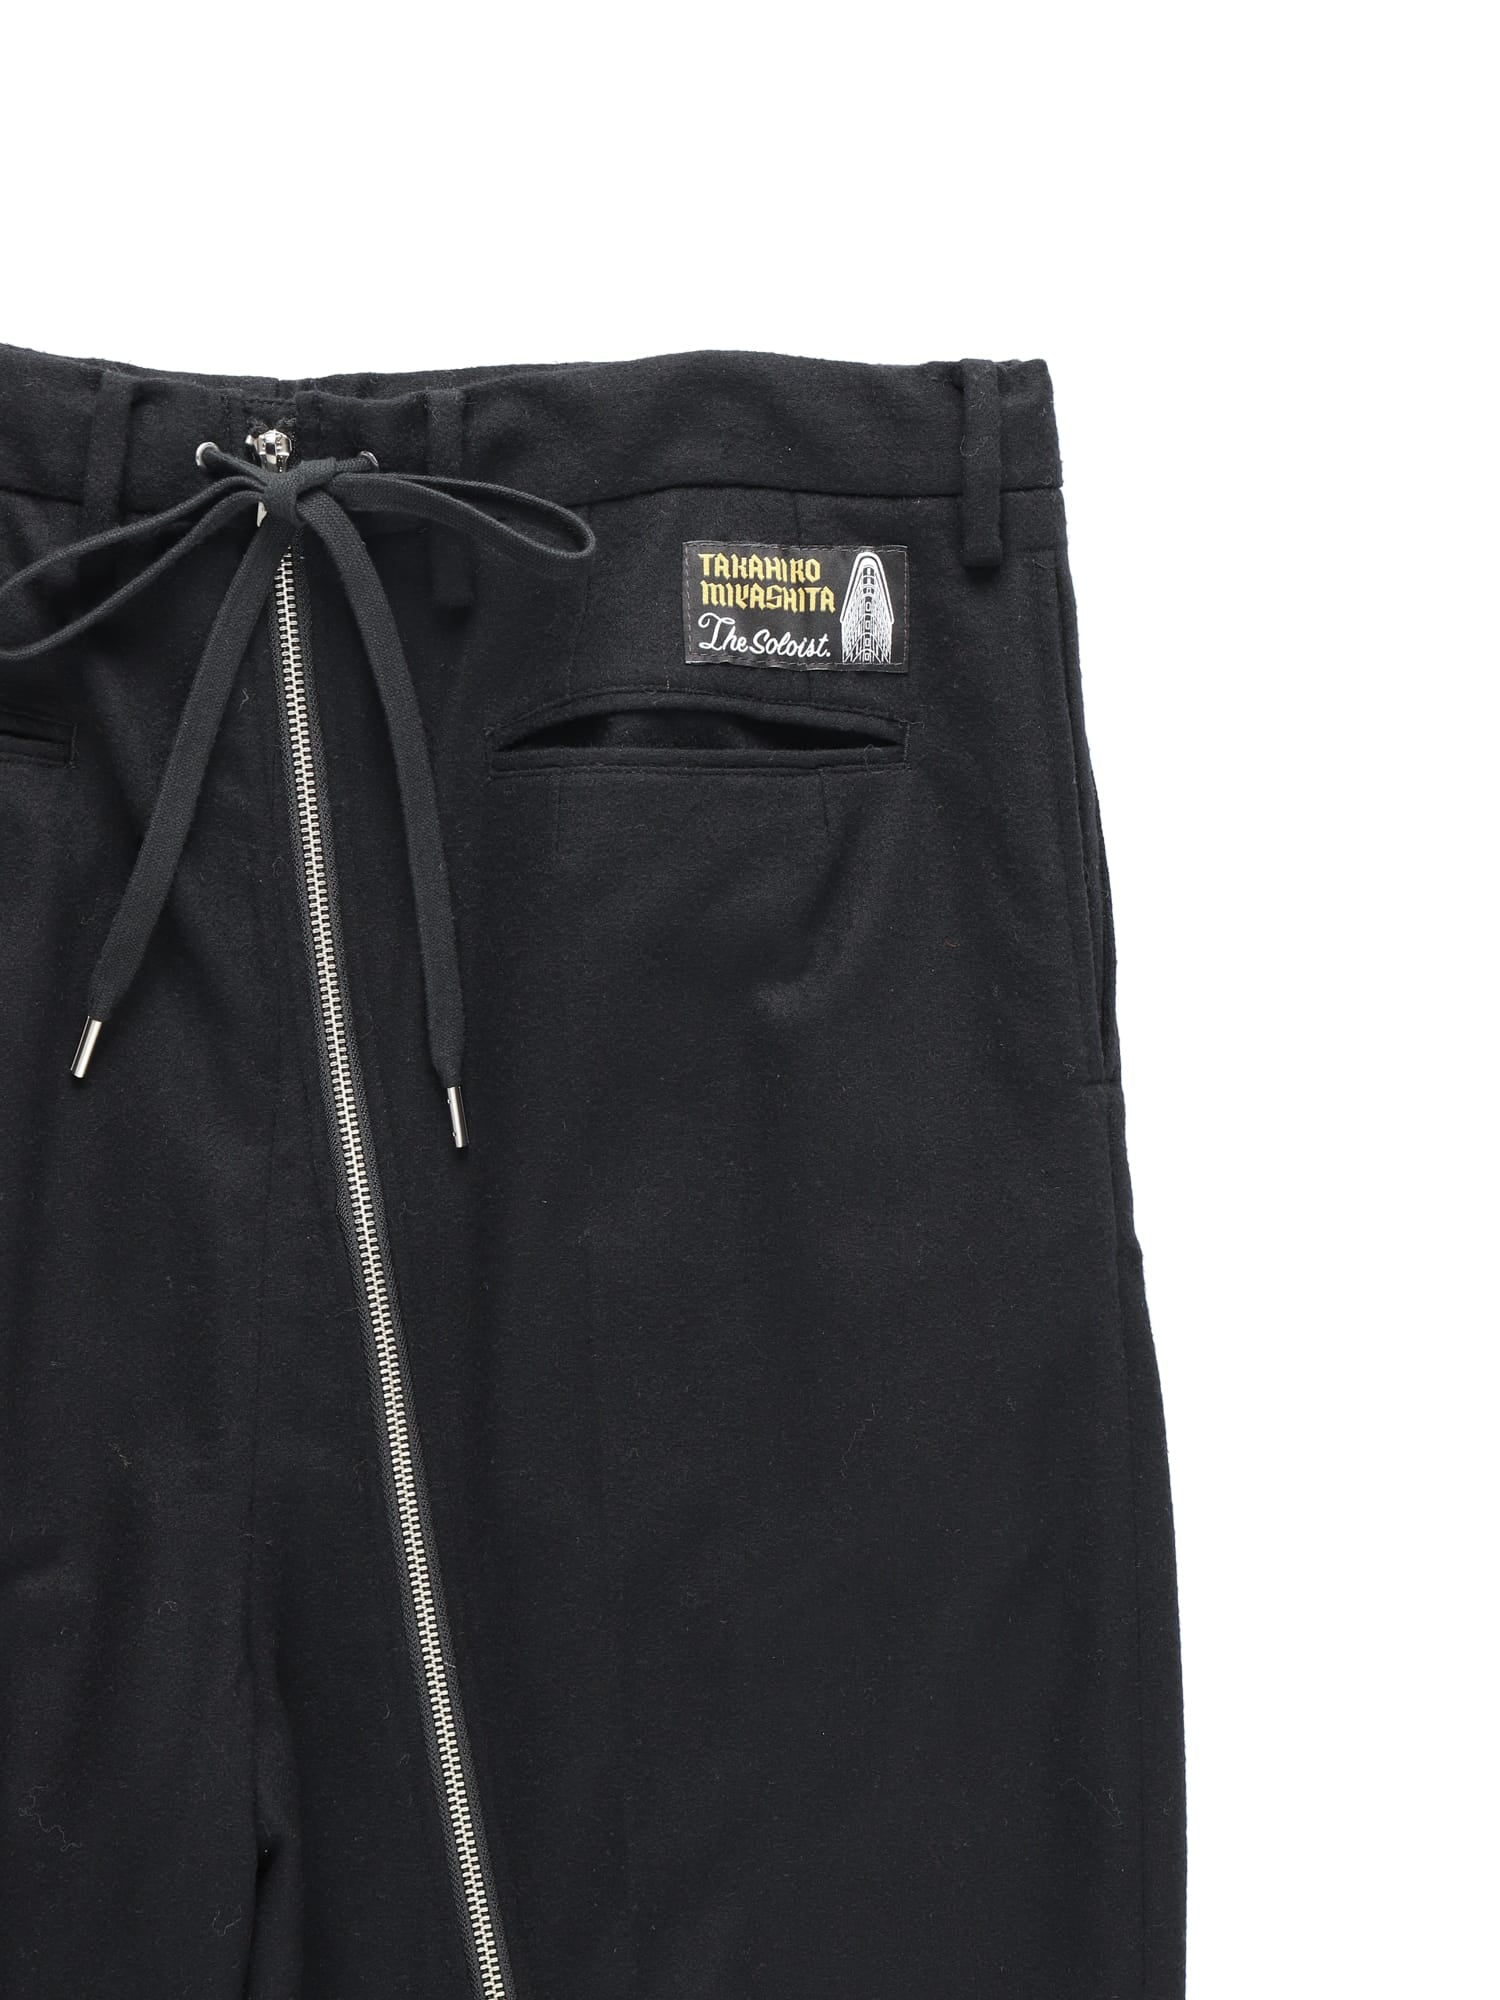 sp.0002bAW22_black reverse cropped baggy zipper pant. TheSoloist